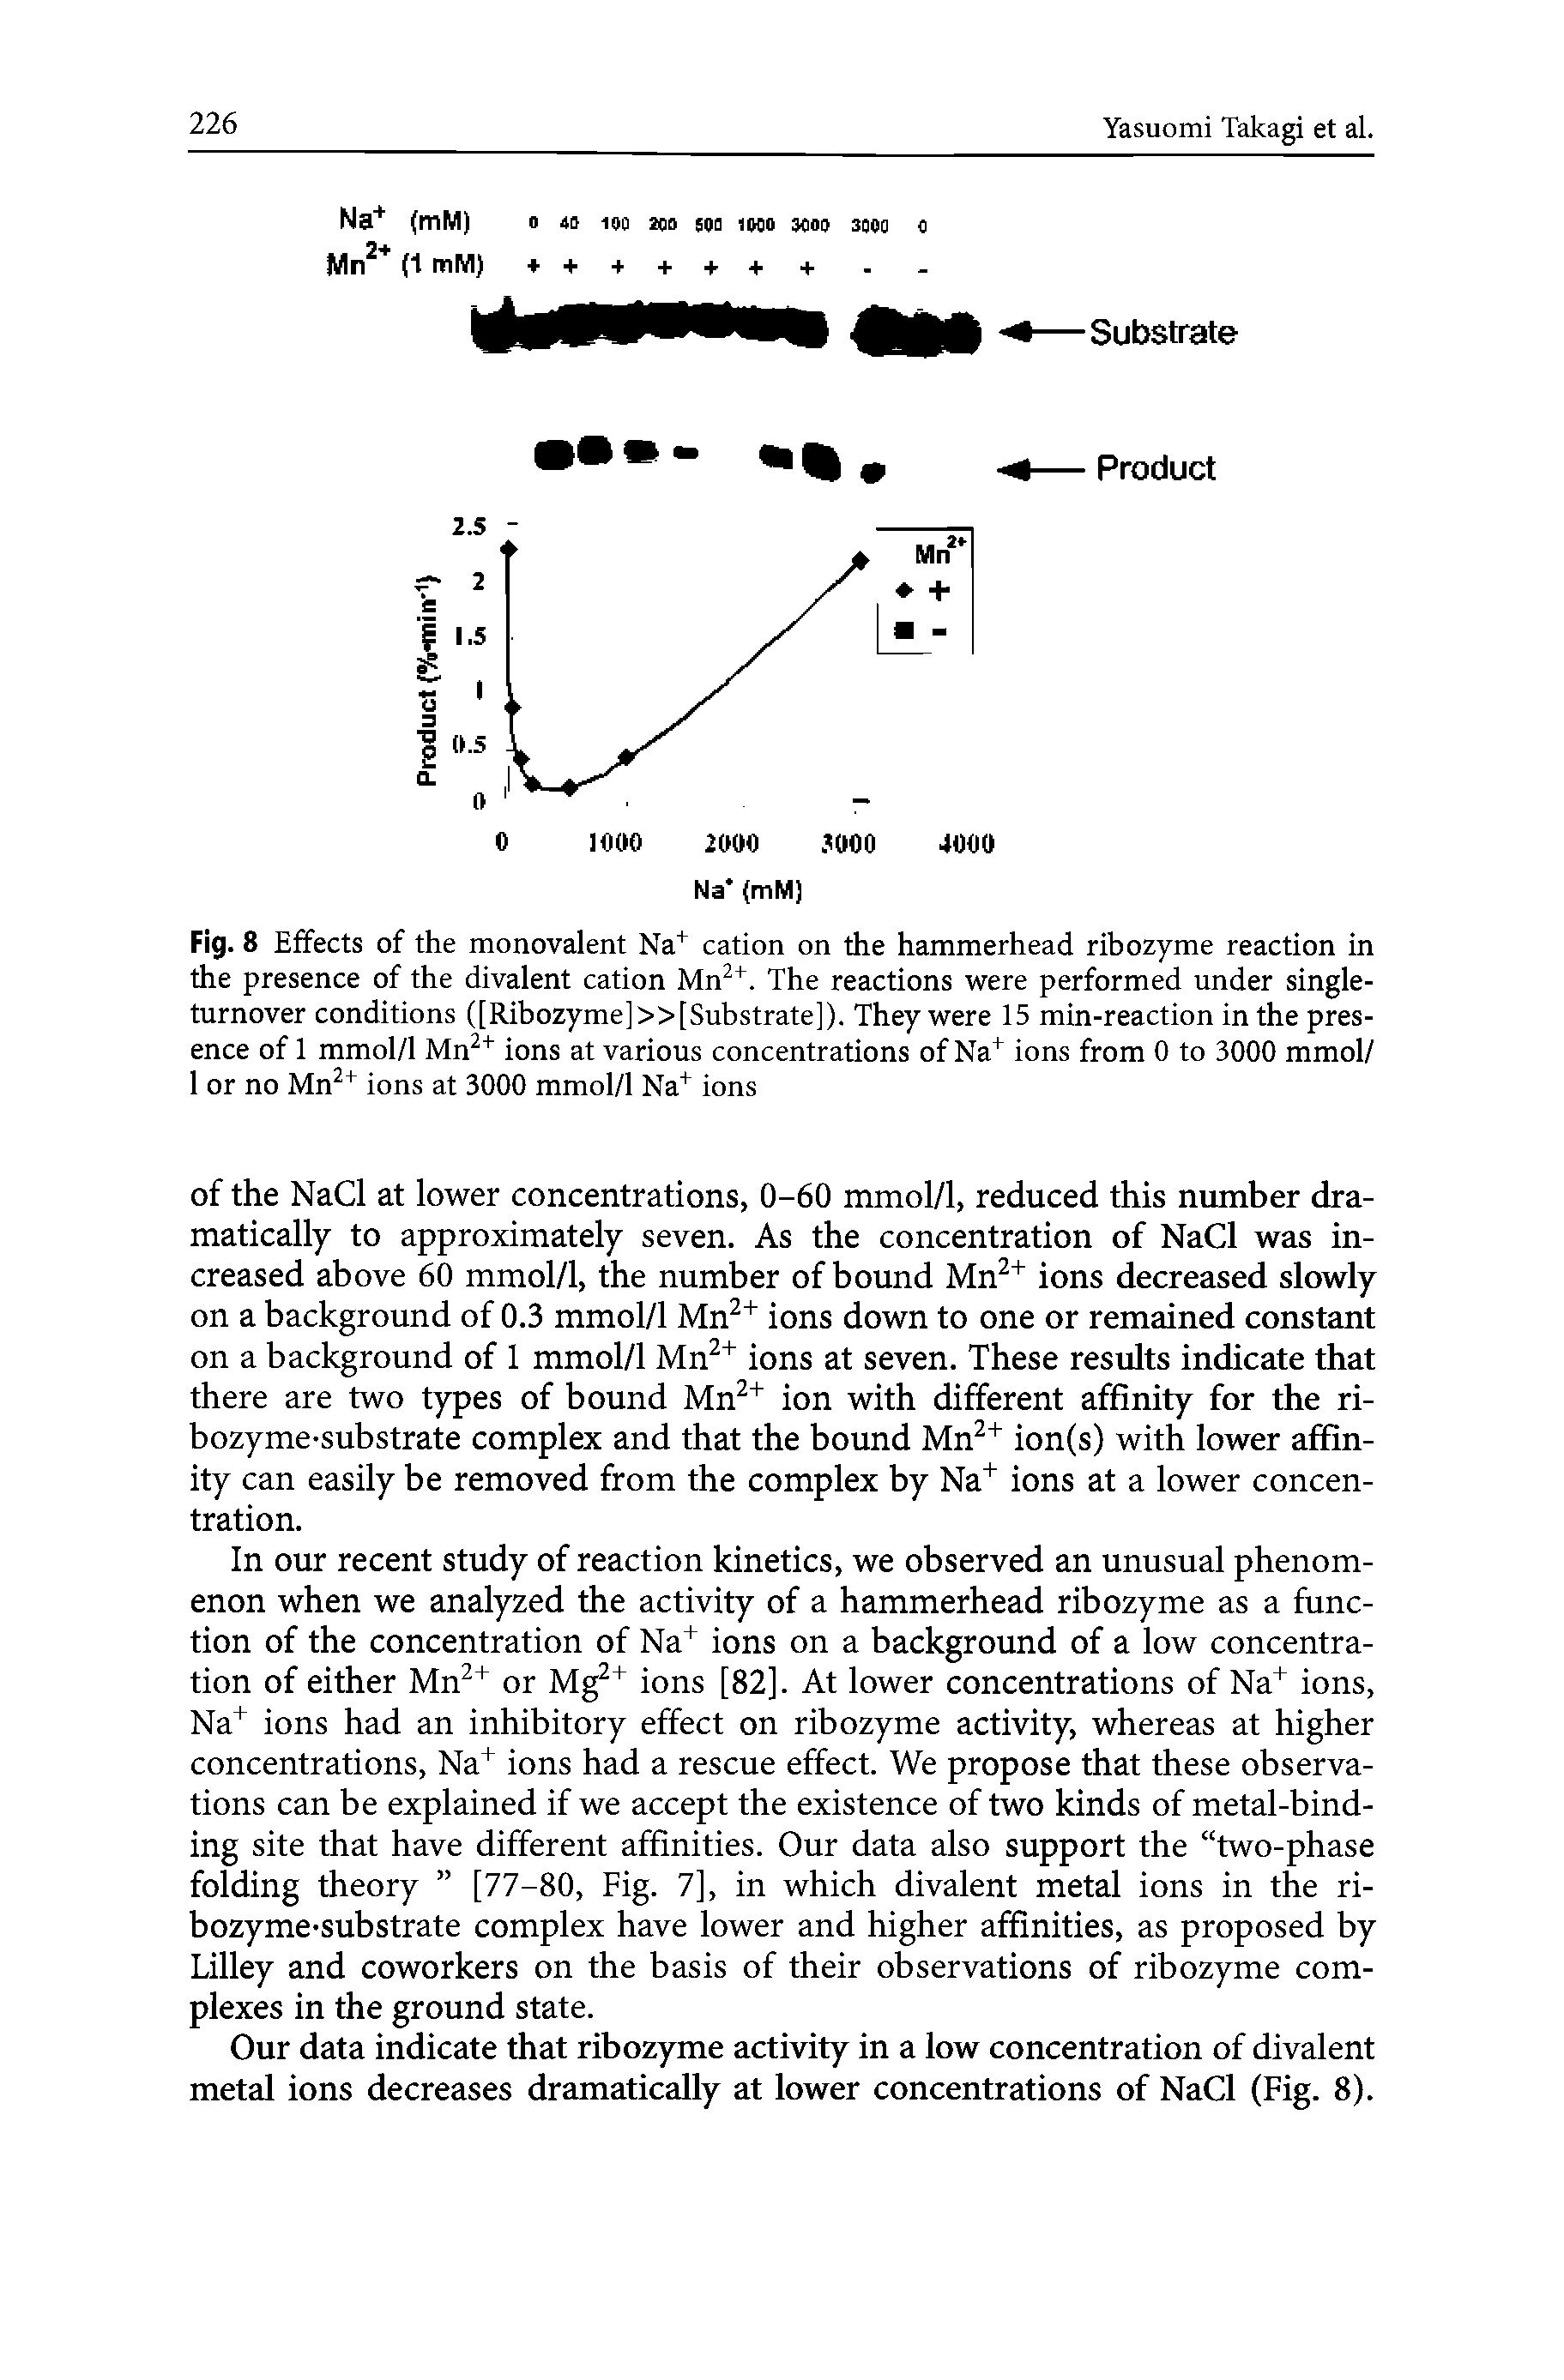 Fig. 8 Effects of the monovalent Na" cation on the hammerhead ribozyme reaction in the presence of the divalent cation Mn. The reactions were performed under singleturnover conditions ([Ribozyme]>>[Substrate]). They were 15 min-reaction in the presence of 1 mmol/1 Mn ions at various concentrations of Na ions from 0 to 3000 mmol/ 1 or no Mn ions at 3000 mmol/1 Na ions...